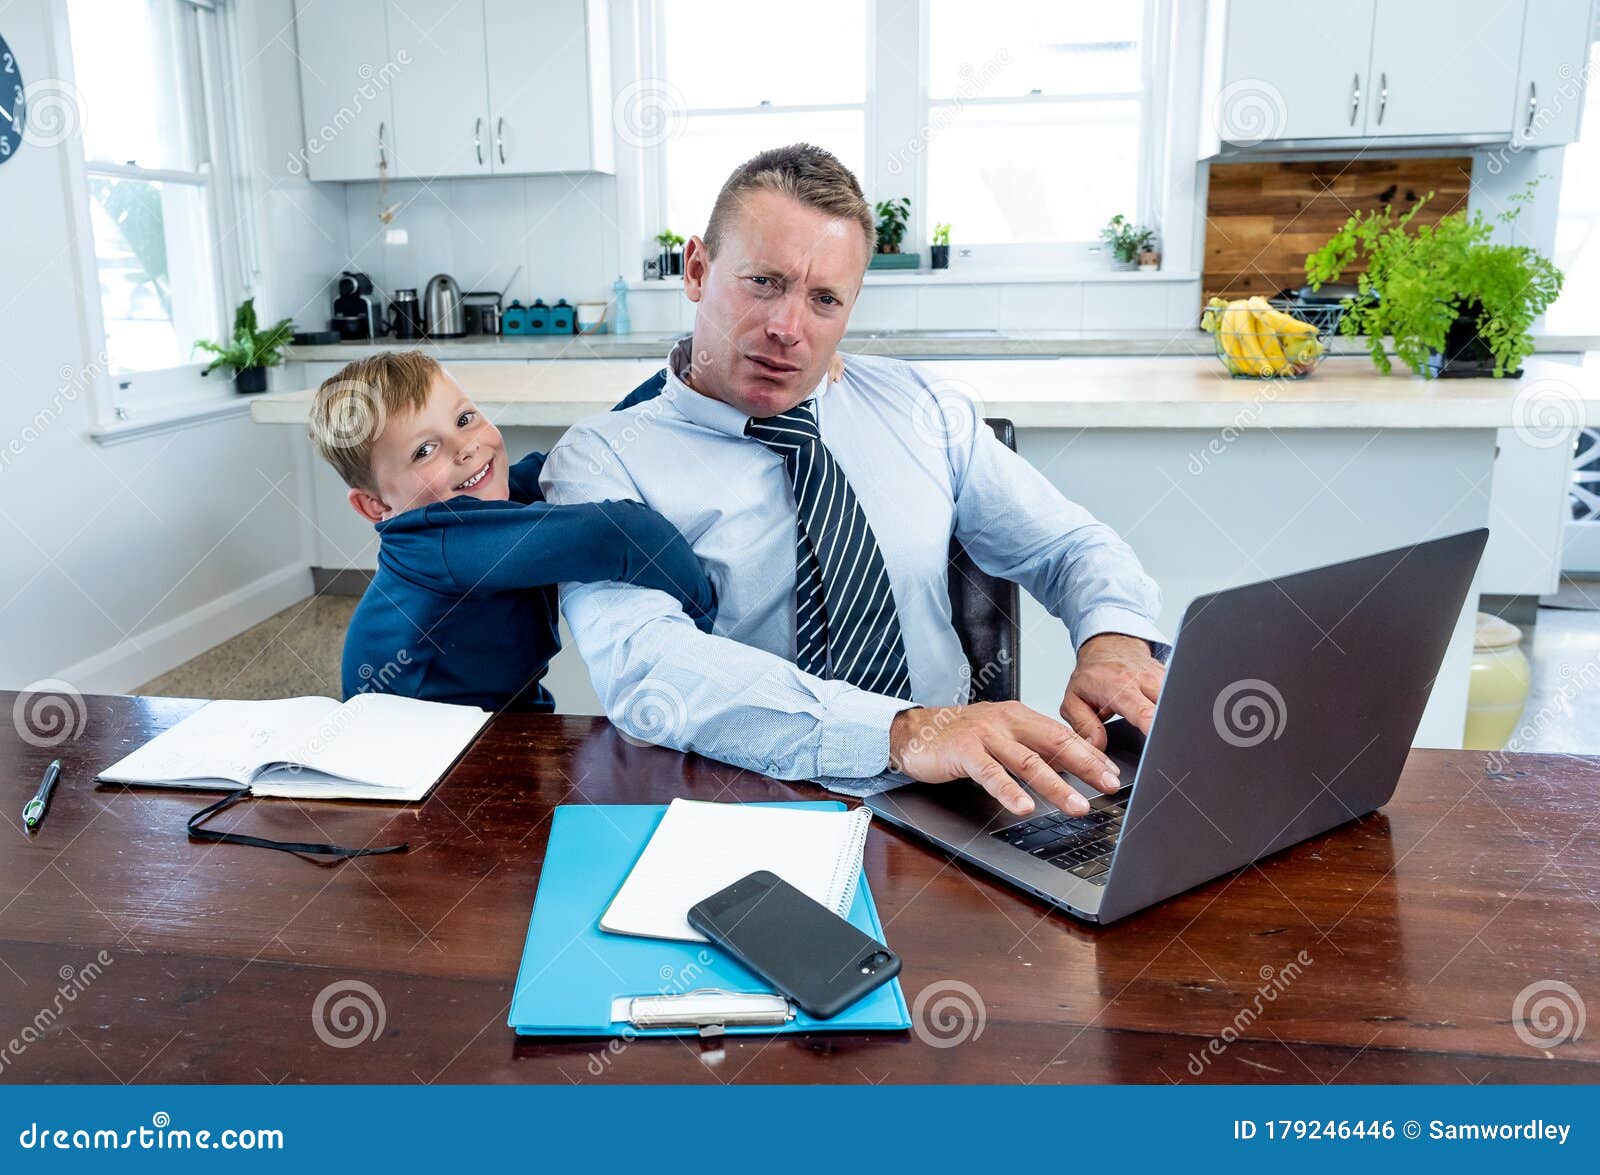 covid-19 school lockdowns and remote working. stressed man trying to work from home with bored son